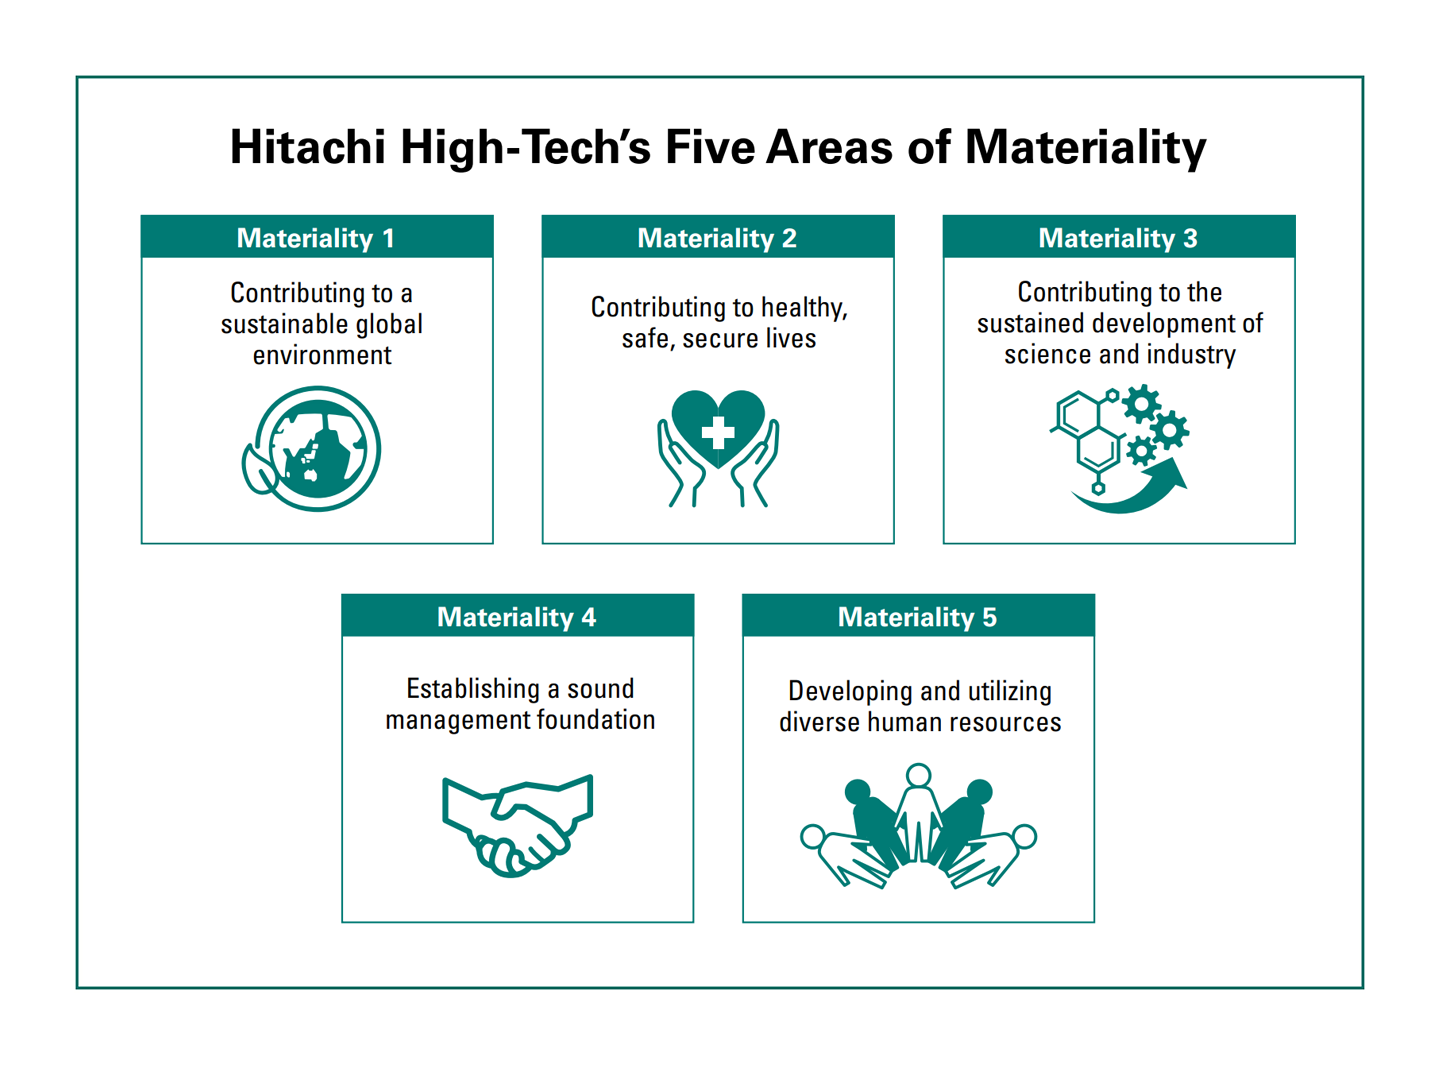 The five areas of Materiality of Hitachi High-Tech Group